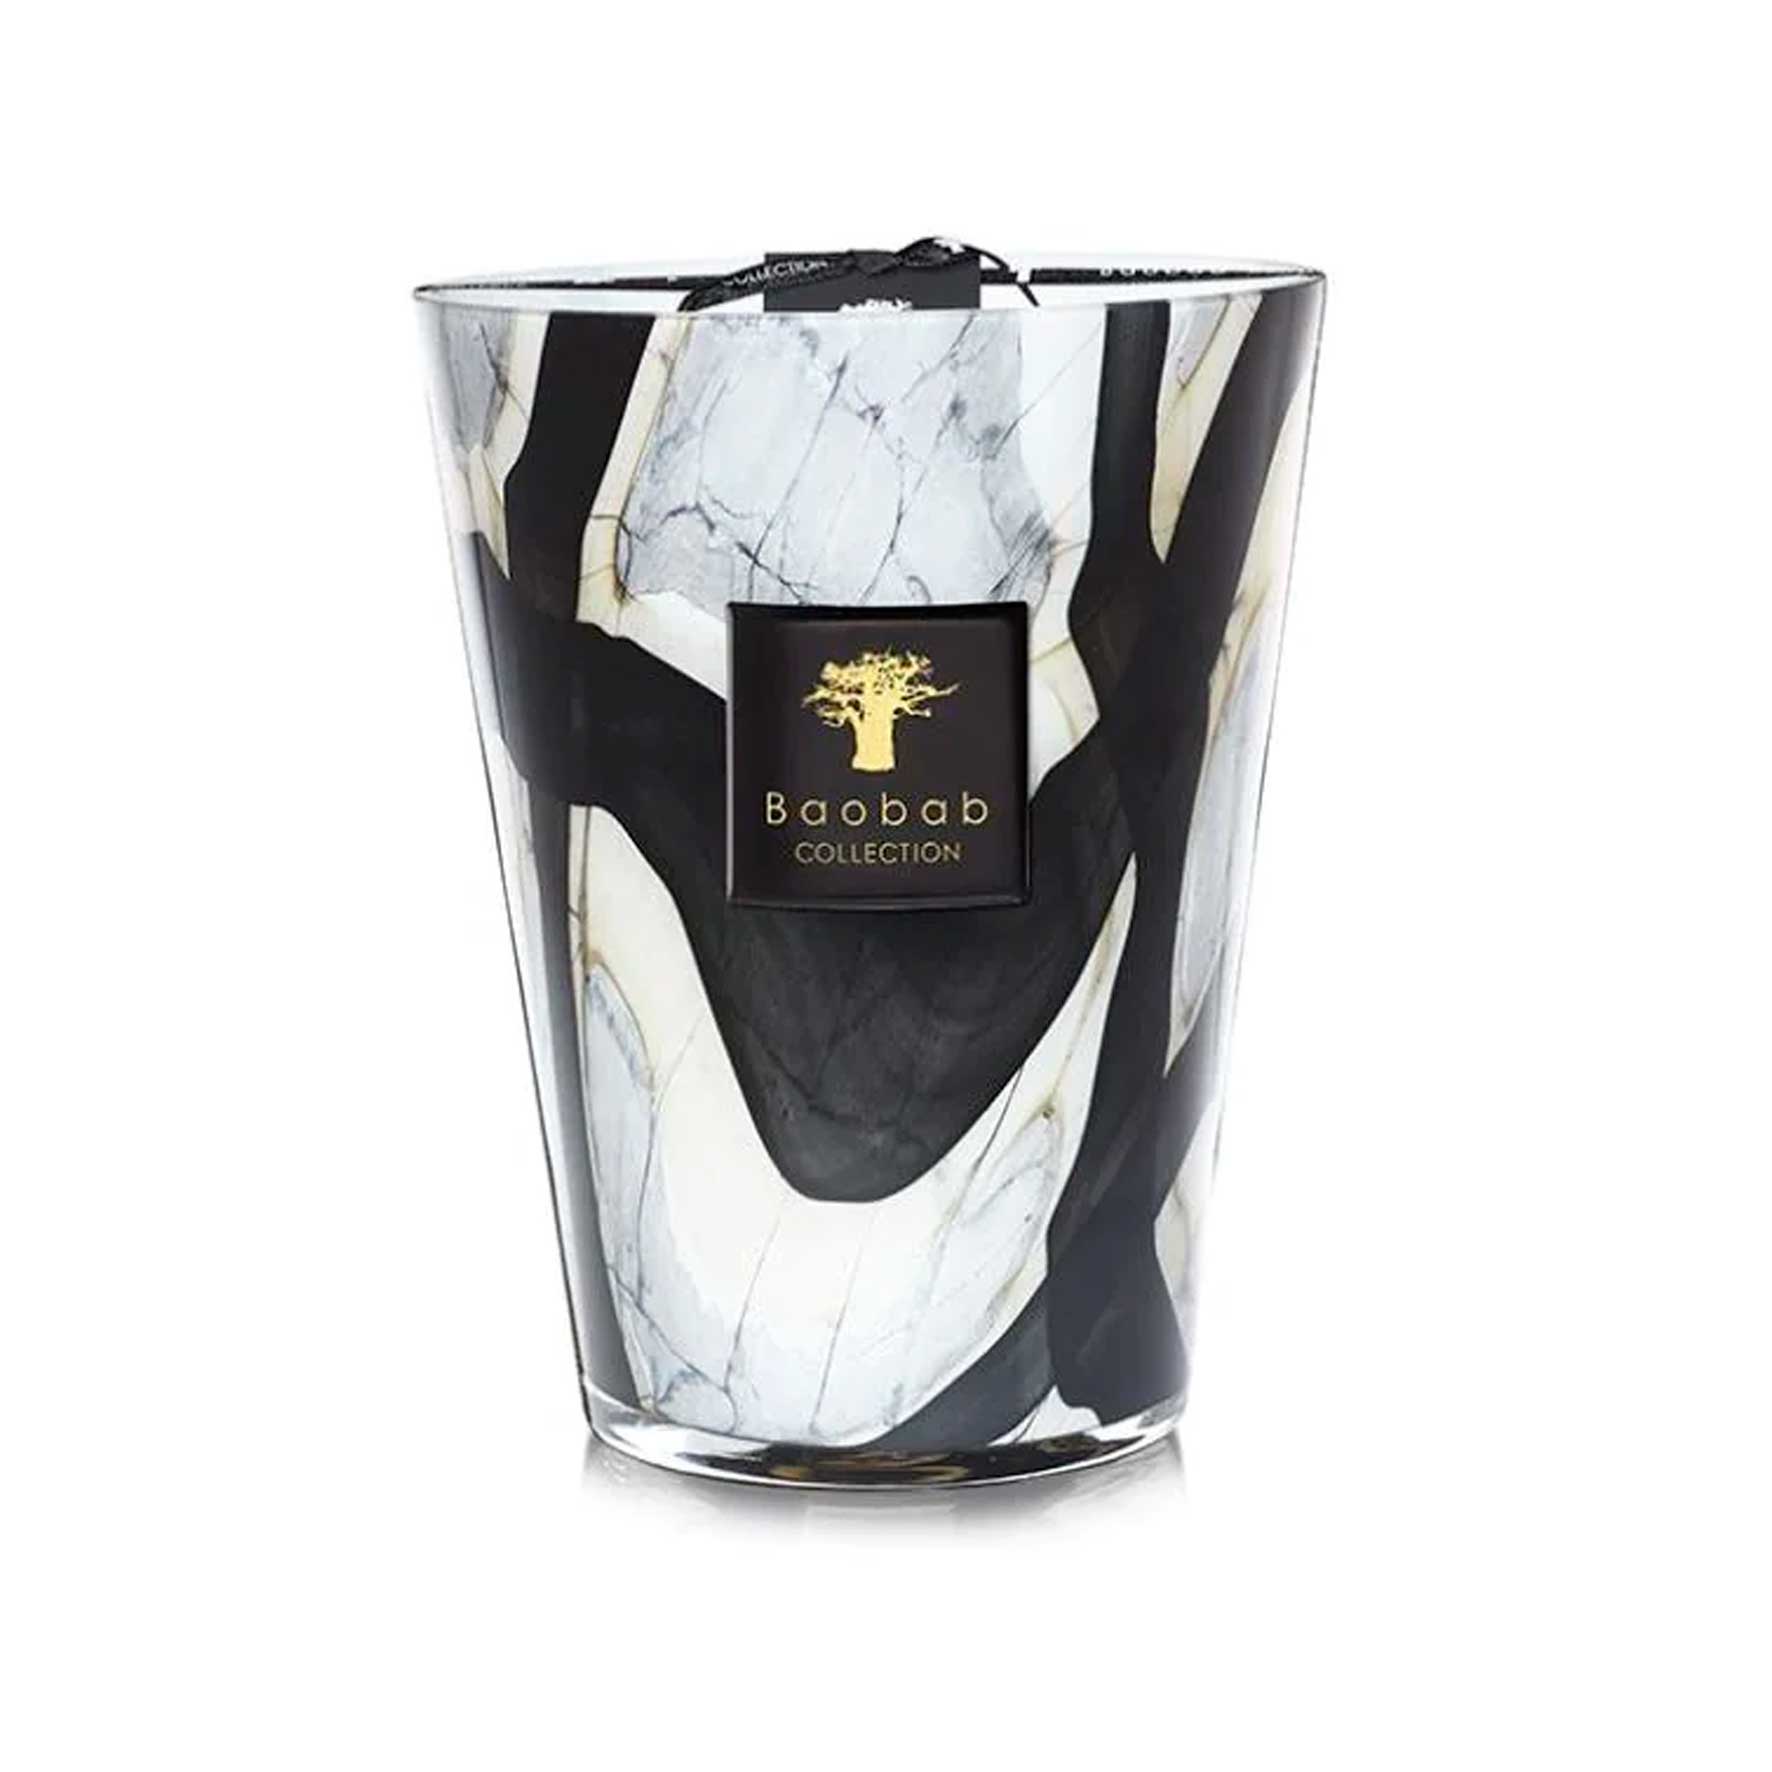 Baobab Collection Stones Marble Scented Candle, Black Glass | Barker & Stonehouse